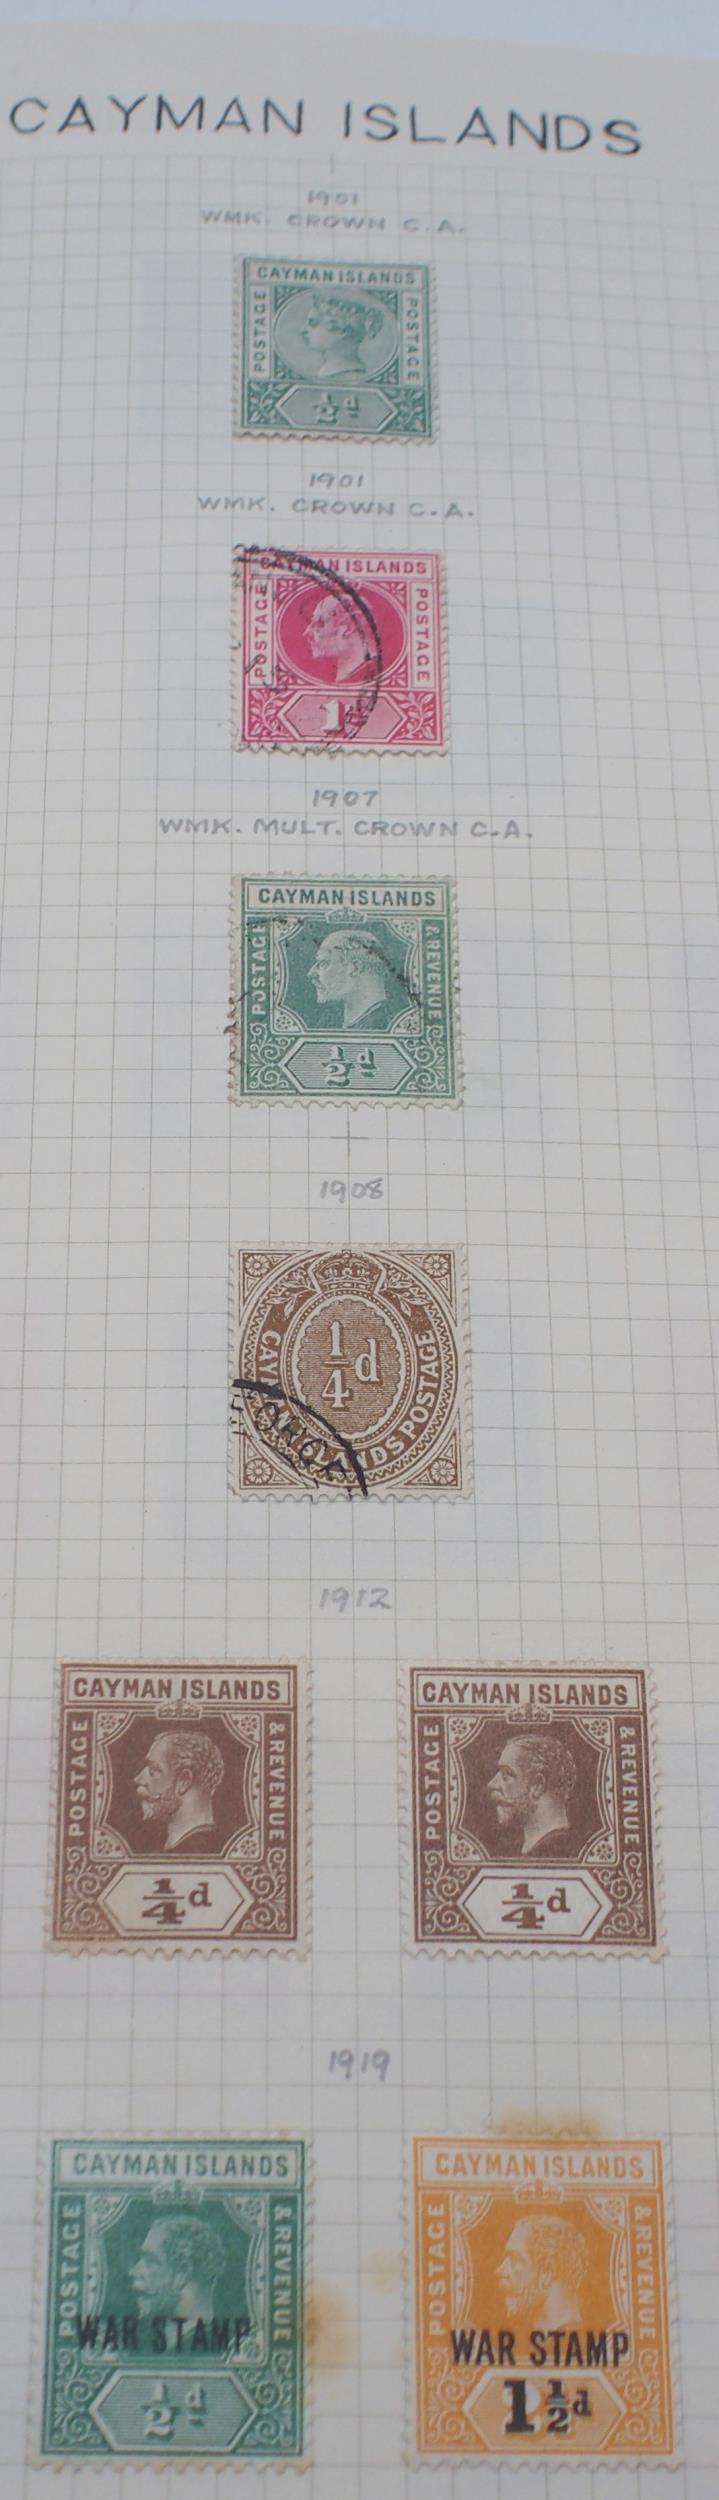 British Colonies and Protectorate stamps in a Stanley Gibbons Devon Stamp Album from 1867 Heligoland - Image 20 of 39